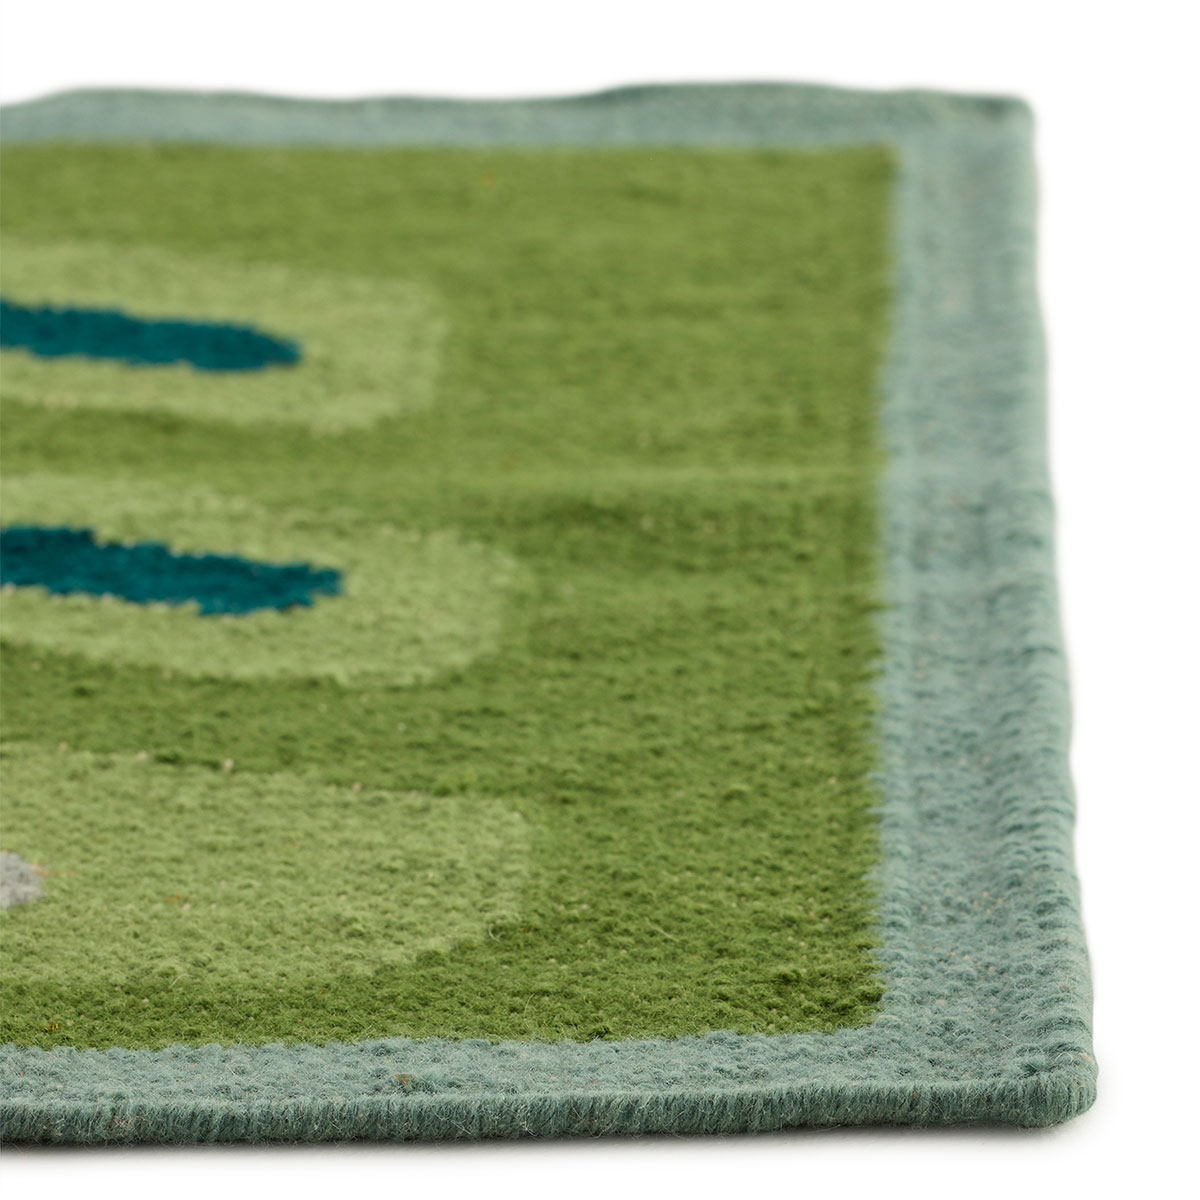 The corner detail of an abstract square small green rug named Pterapod Grass.